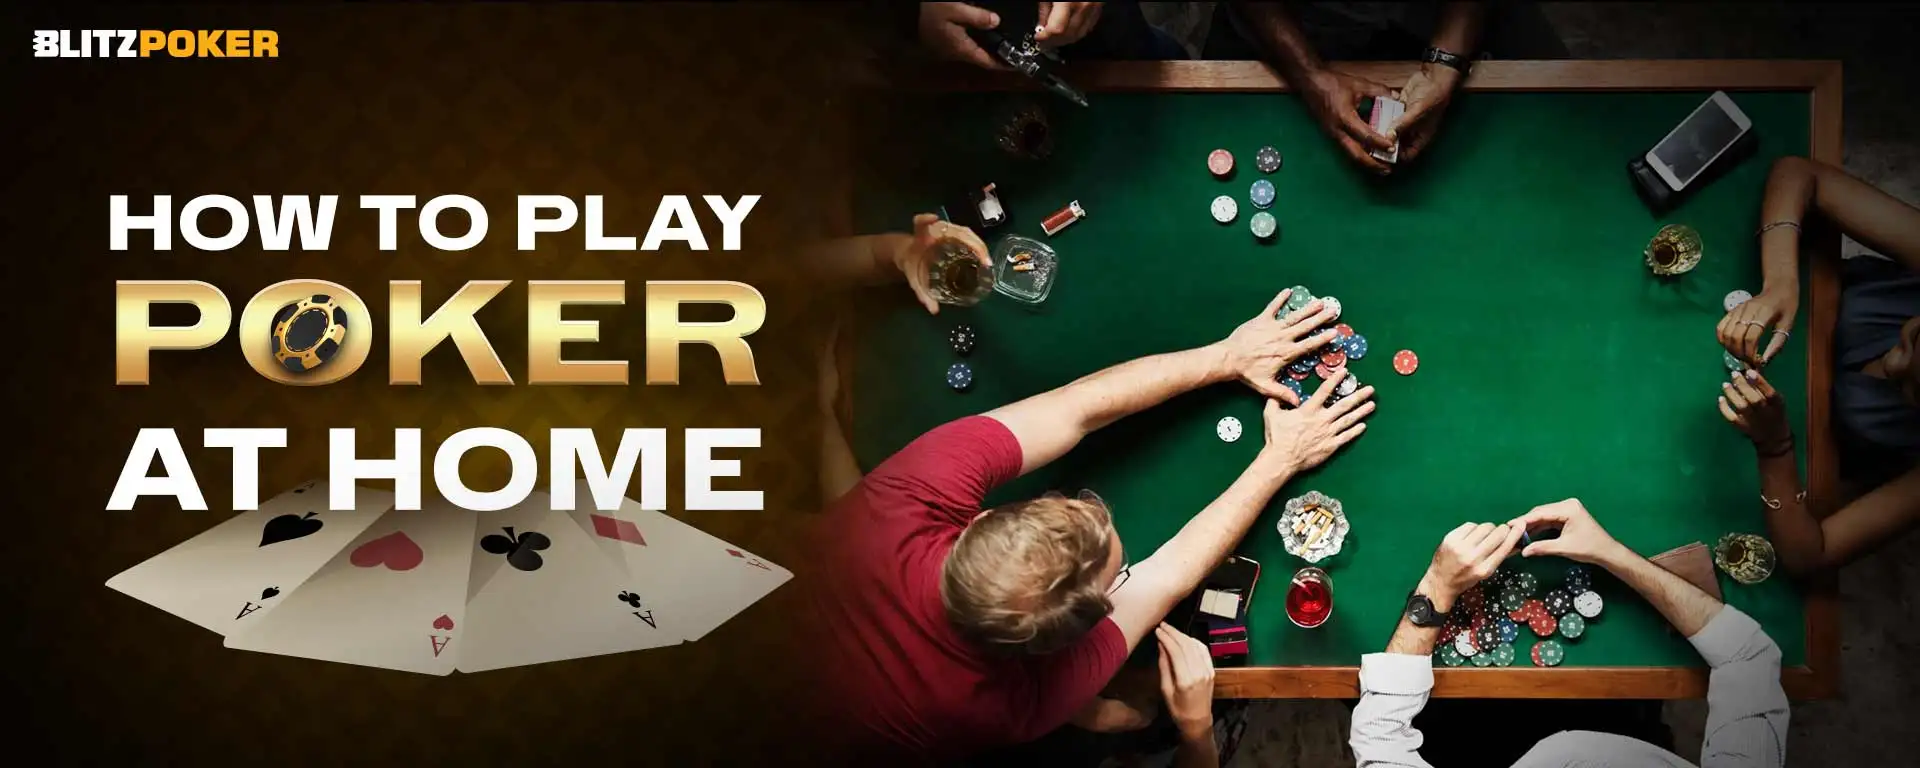 How to Play Poker at Home